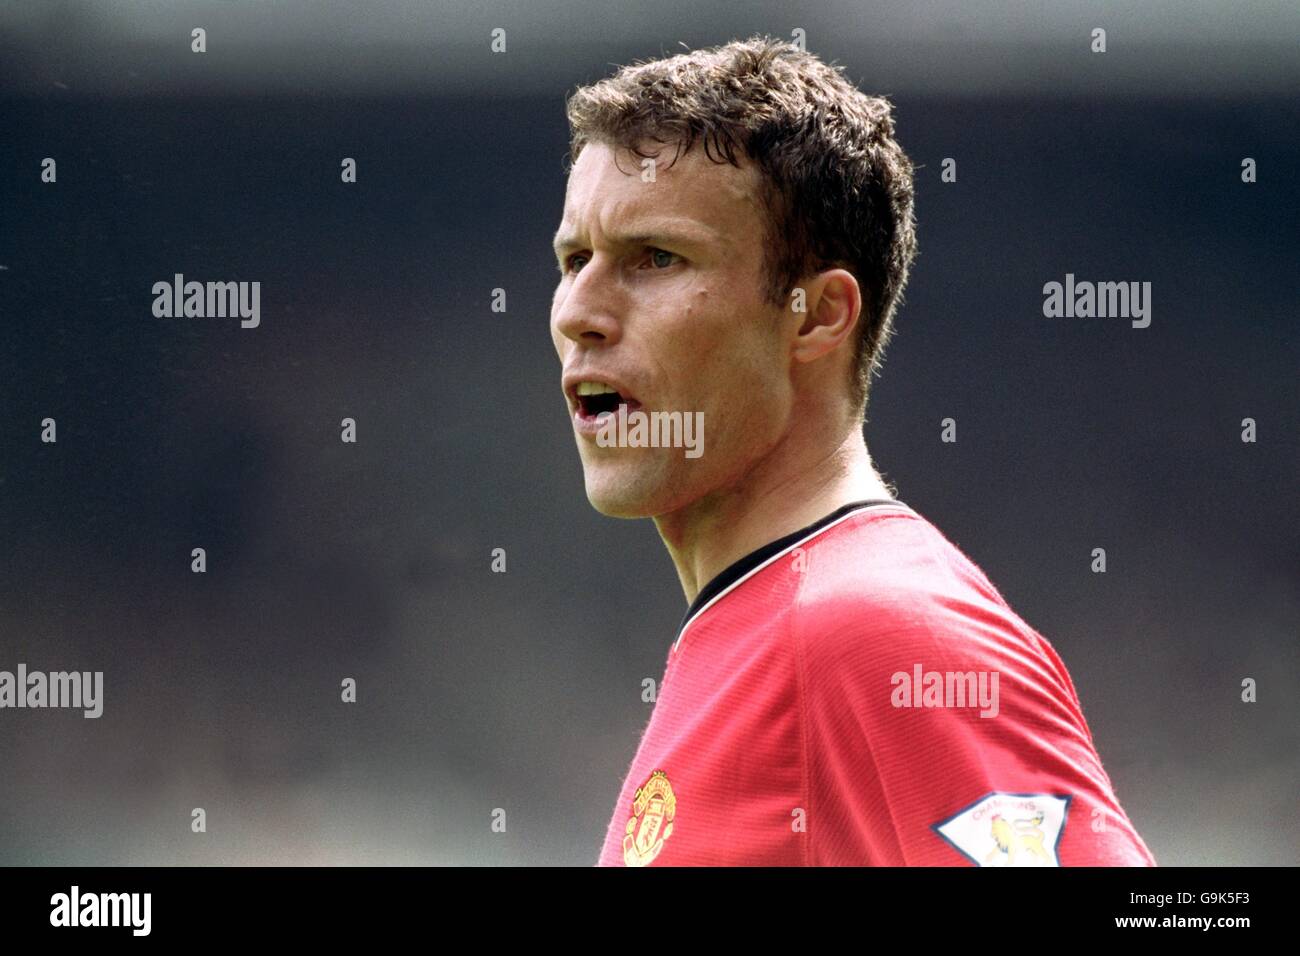 Soccer - FA Carling Premiership - Manchester United v Derby County. Ronny Johnsen, Manchester United Stock Photo